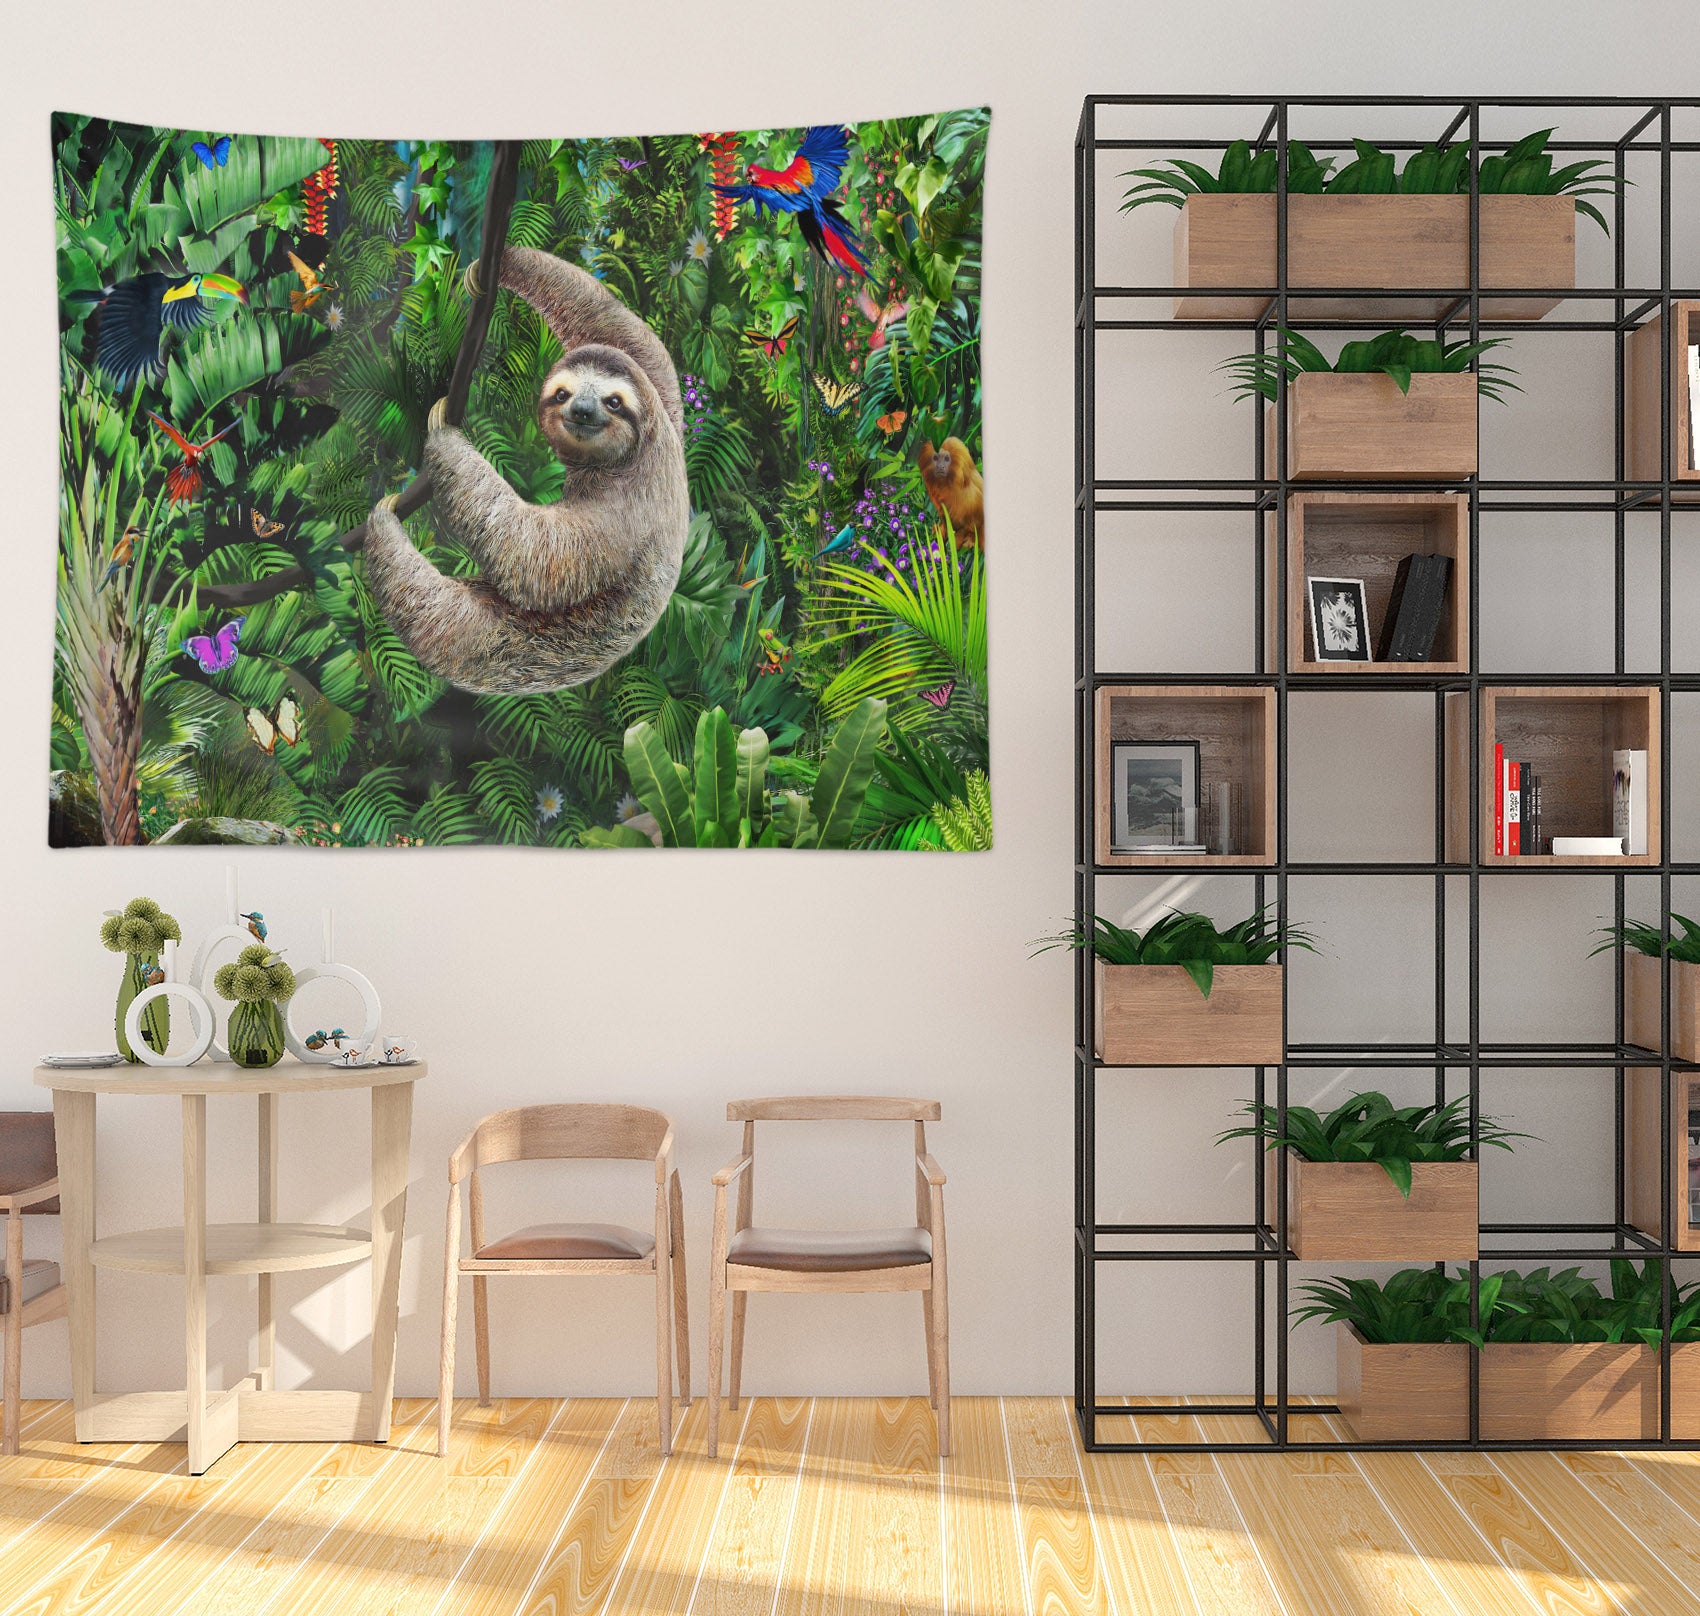 3D Forest Cute Sloth 727 Adrian Chesterman Tapestry Hanging Cloth Hang